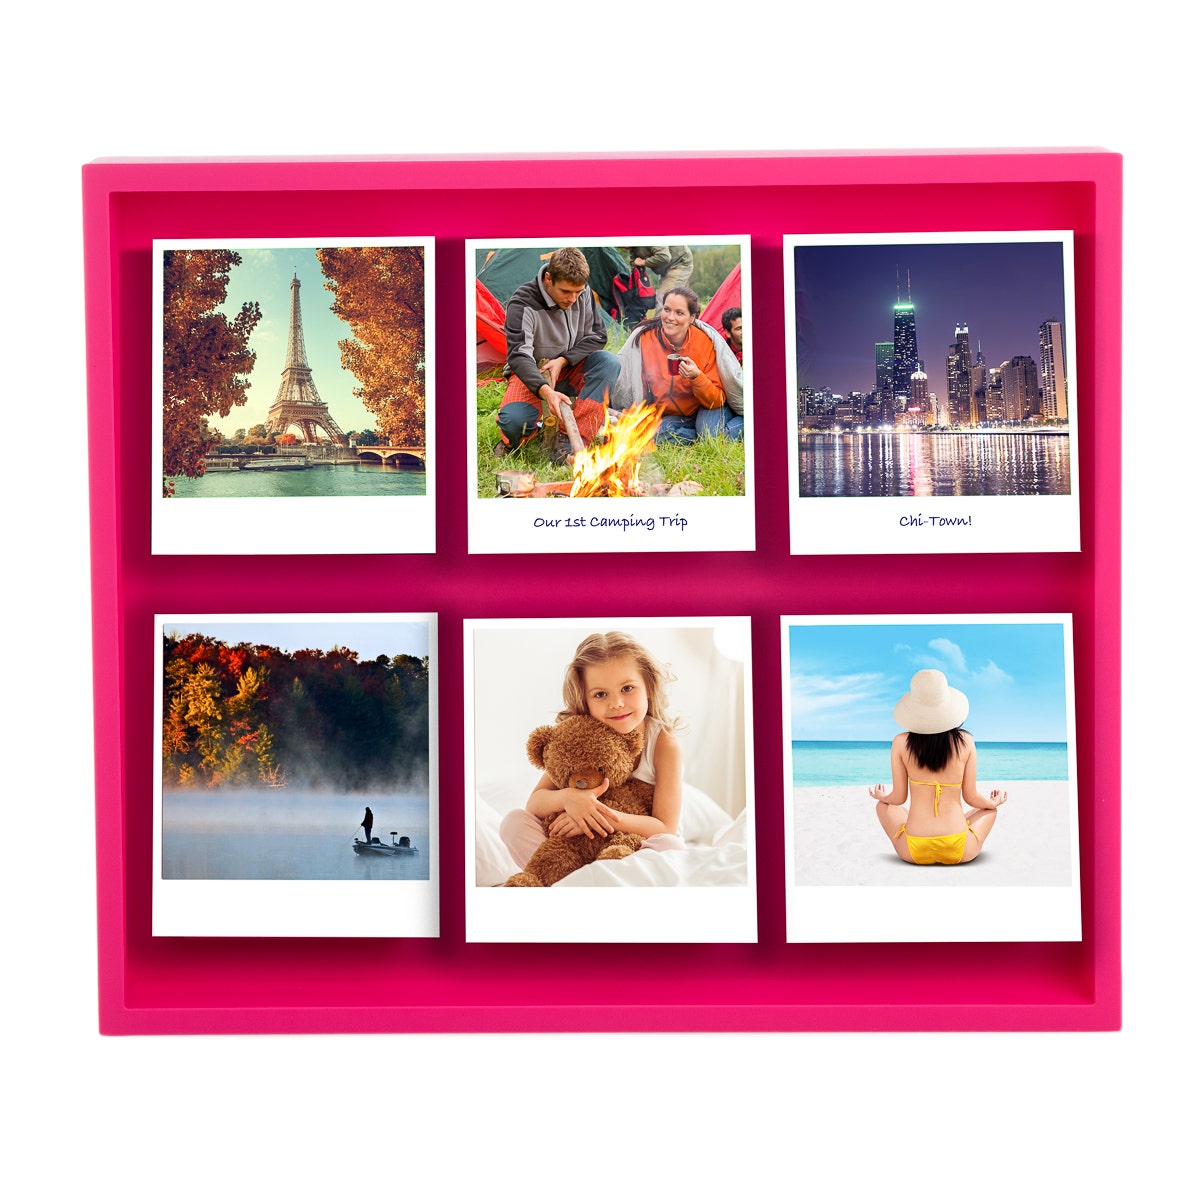 Magnetic 12 x 10” Polaroid Frame - Holds Big Or Multiple Photos